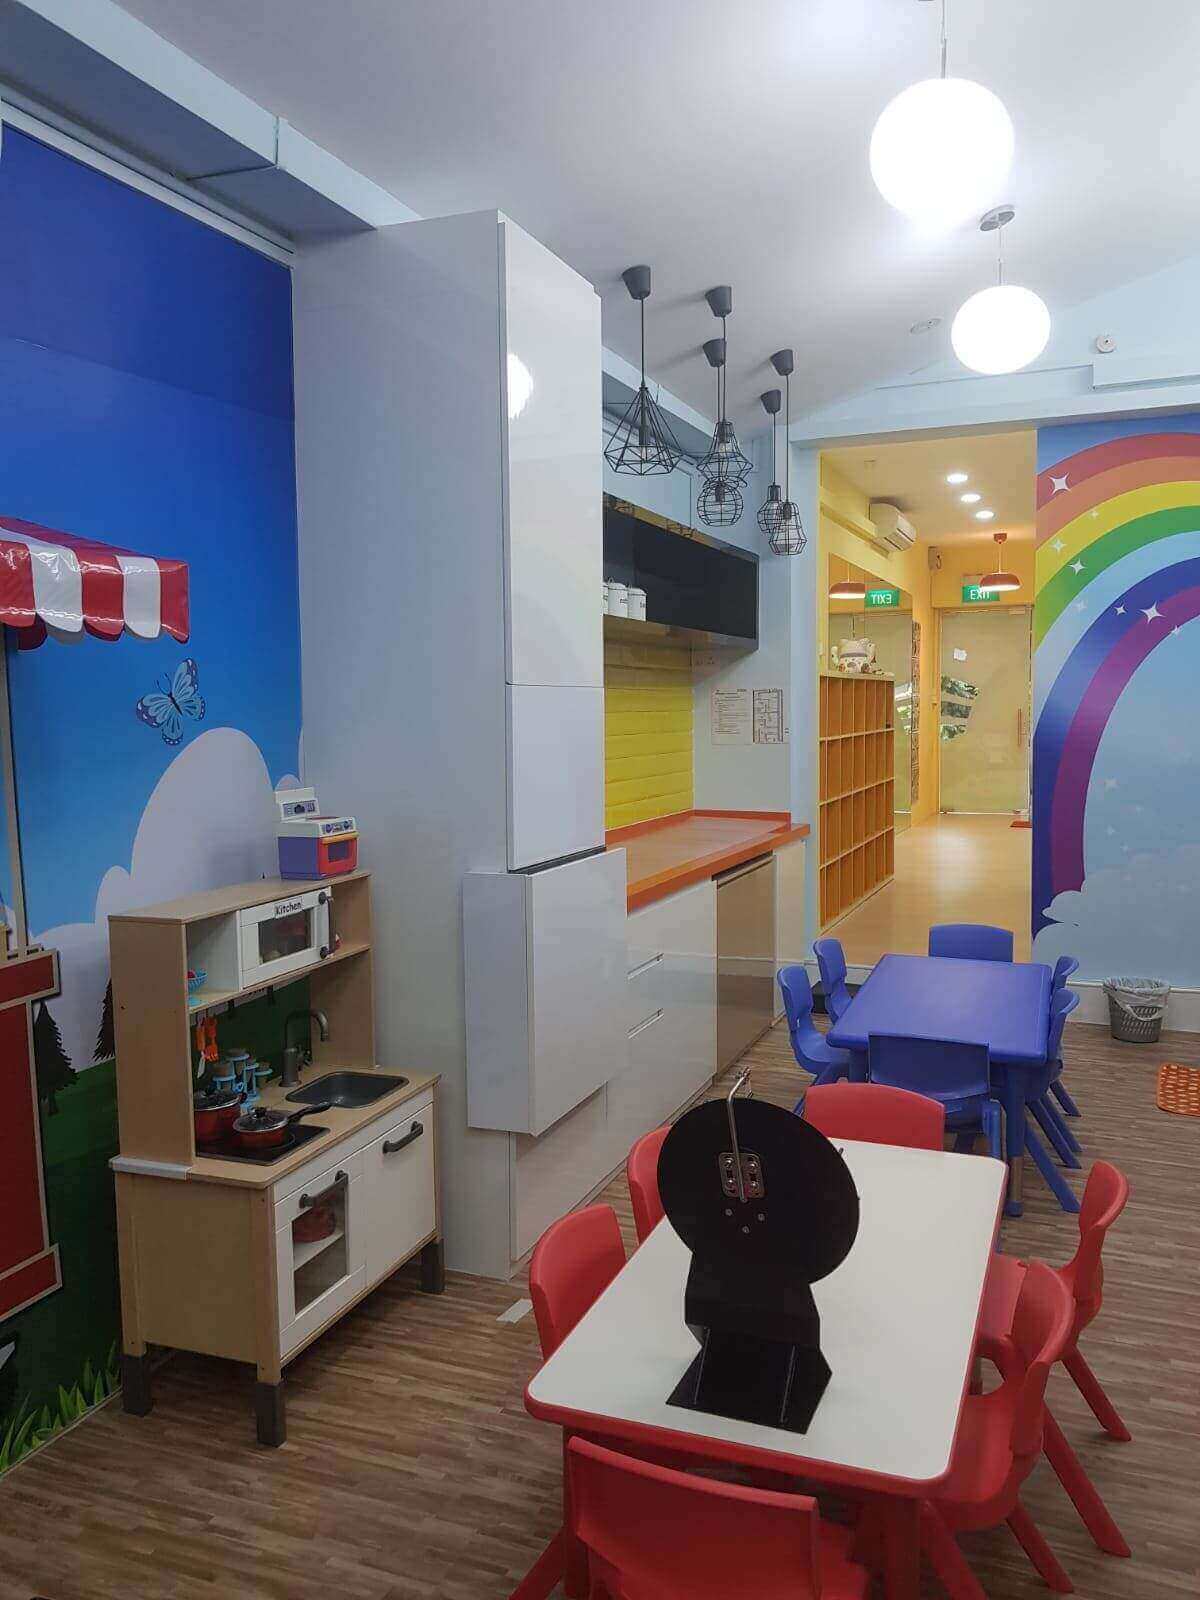 (Expired)Newly Set Up Childcare Centre Good Sheer Size For Bigger Capacity